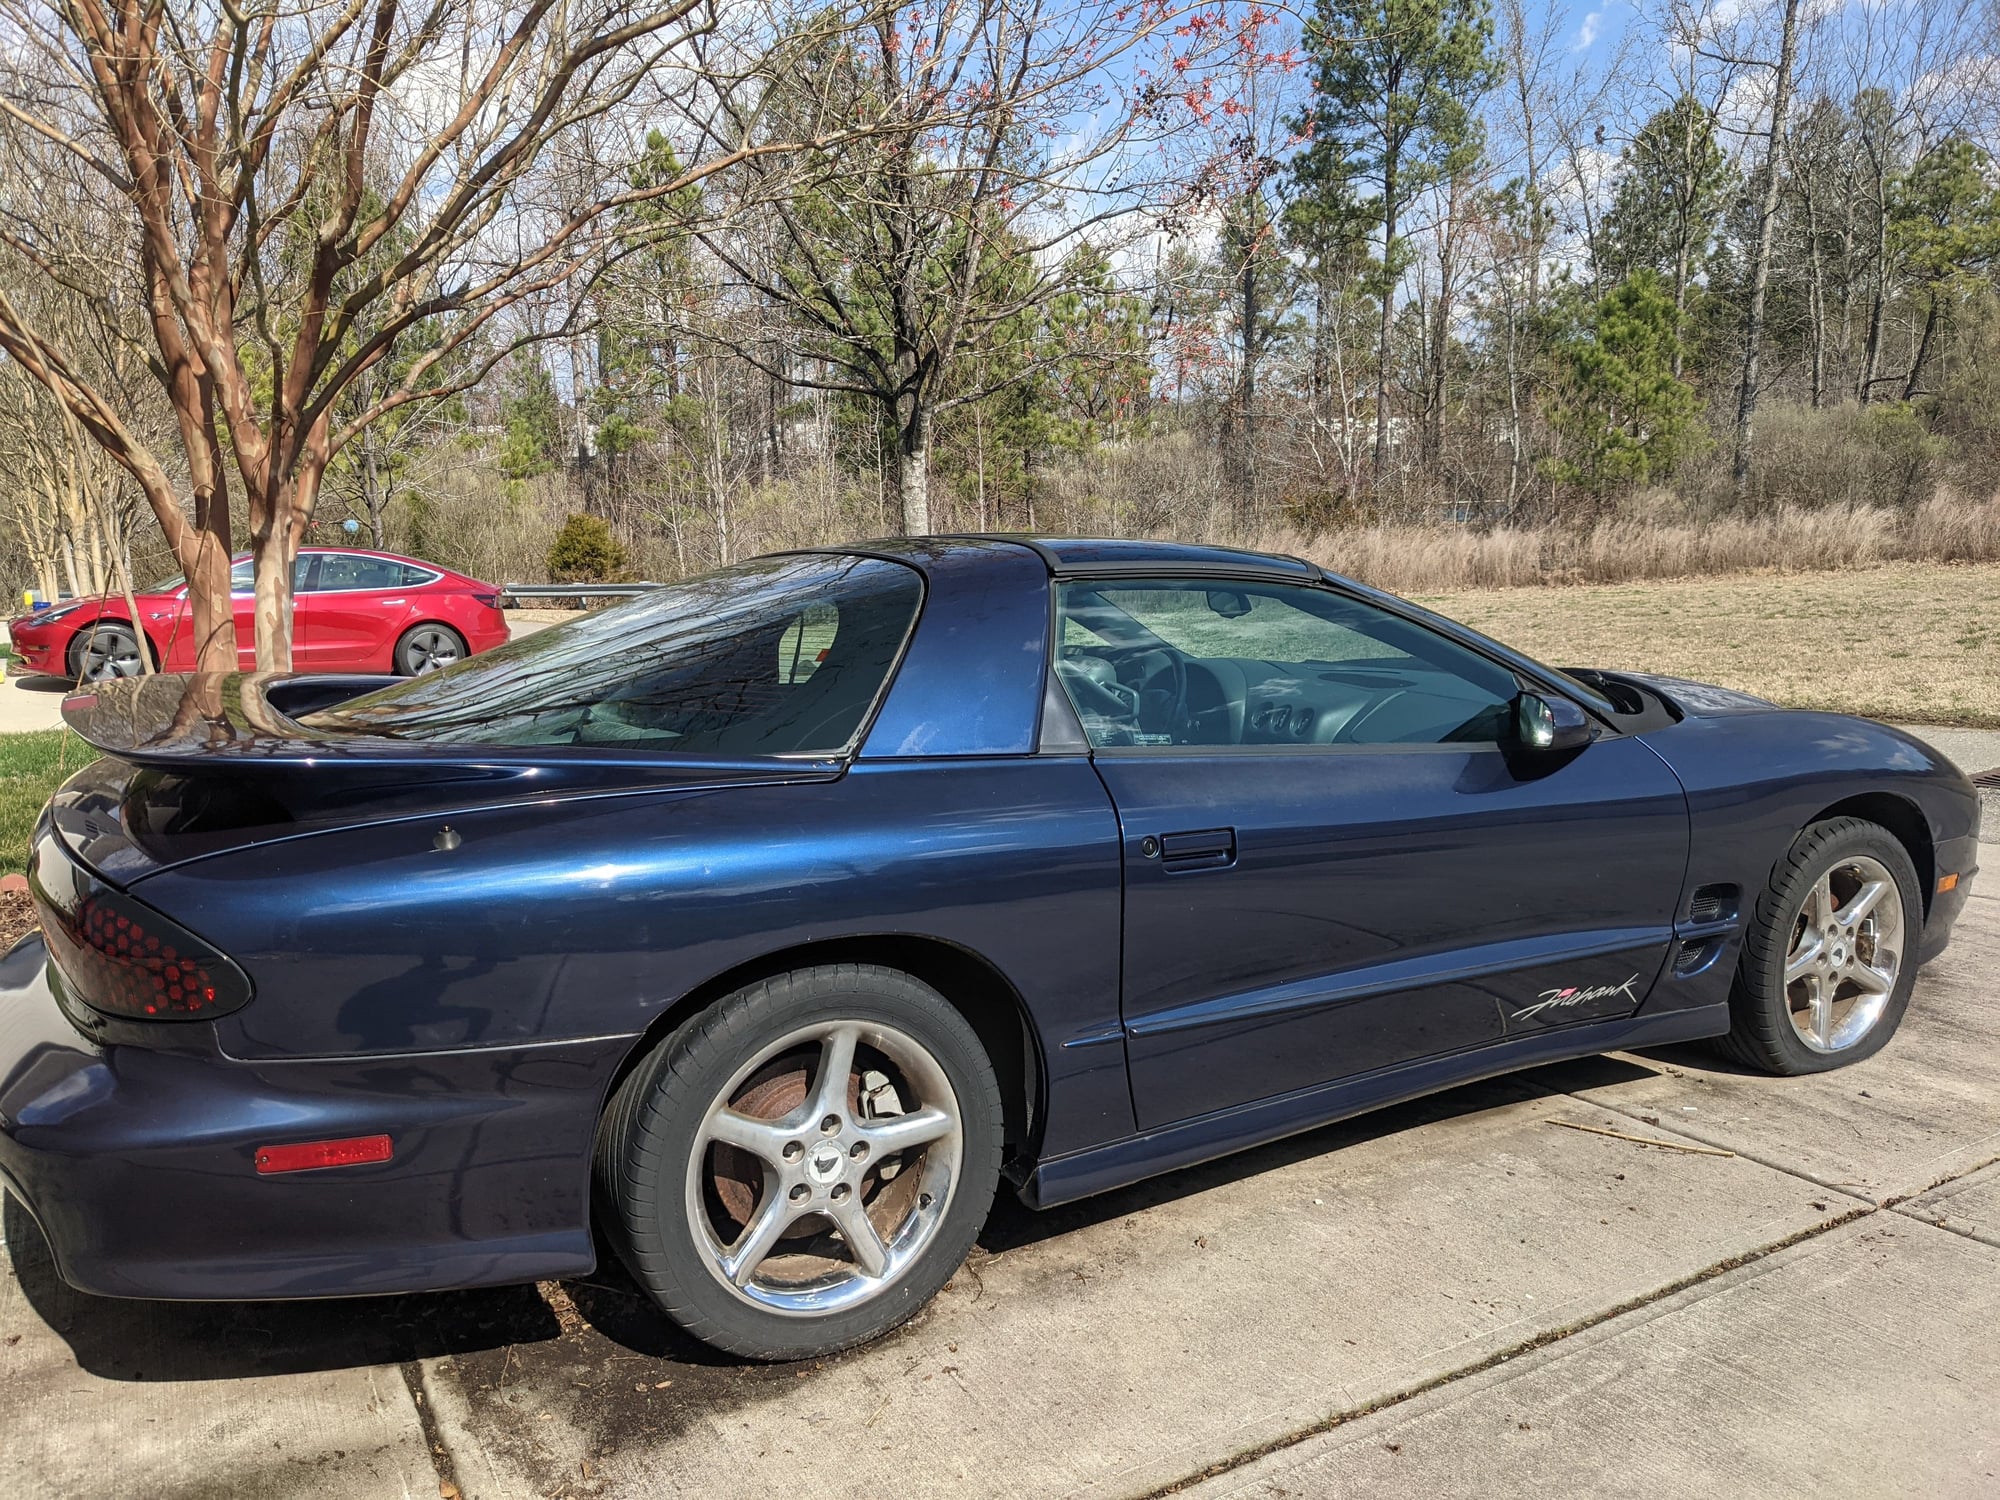 1999 Pontiac Firebird - Low mileage 1999 Pontiac Trans Am Firehawk M6 restoration project for sale - Used - VIN 2G2FV22G0X2212248 - 58,790 Miles - 8 cyl - 2WD - Manual - Coupe - Blue - Morrisville, NC 27560, United States